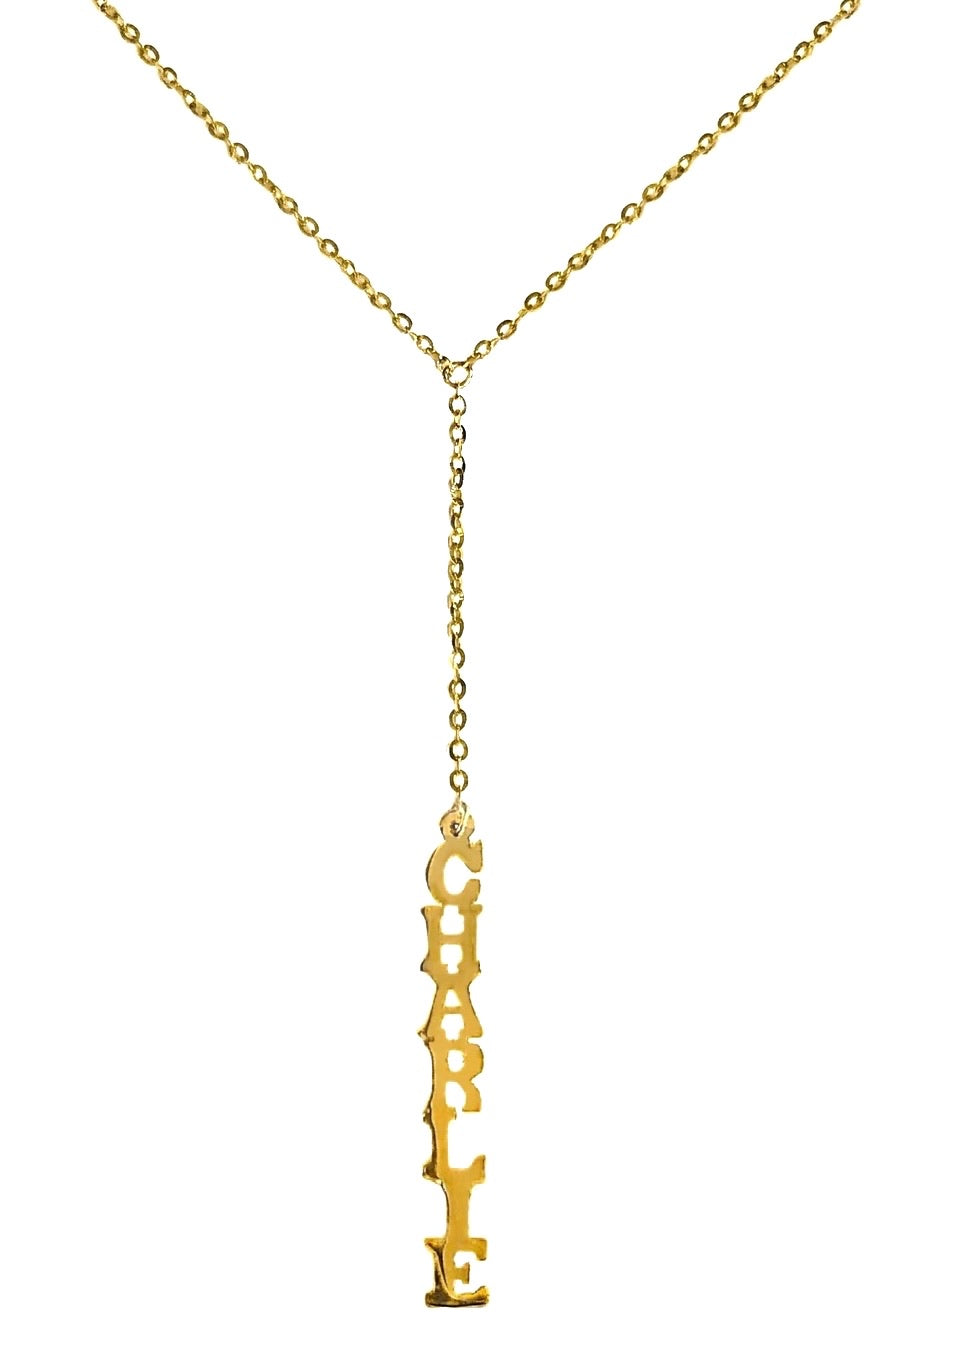 14K YELLOW GOLD ORIGINAL PERSONALIZED LARIAT NECKLACE